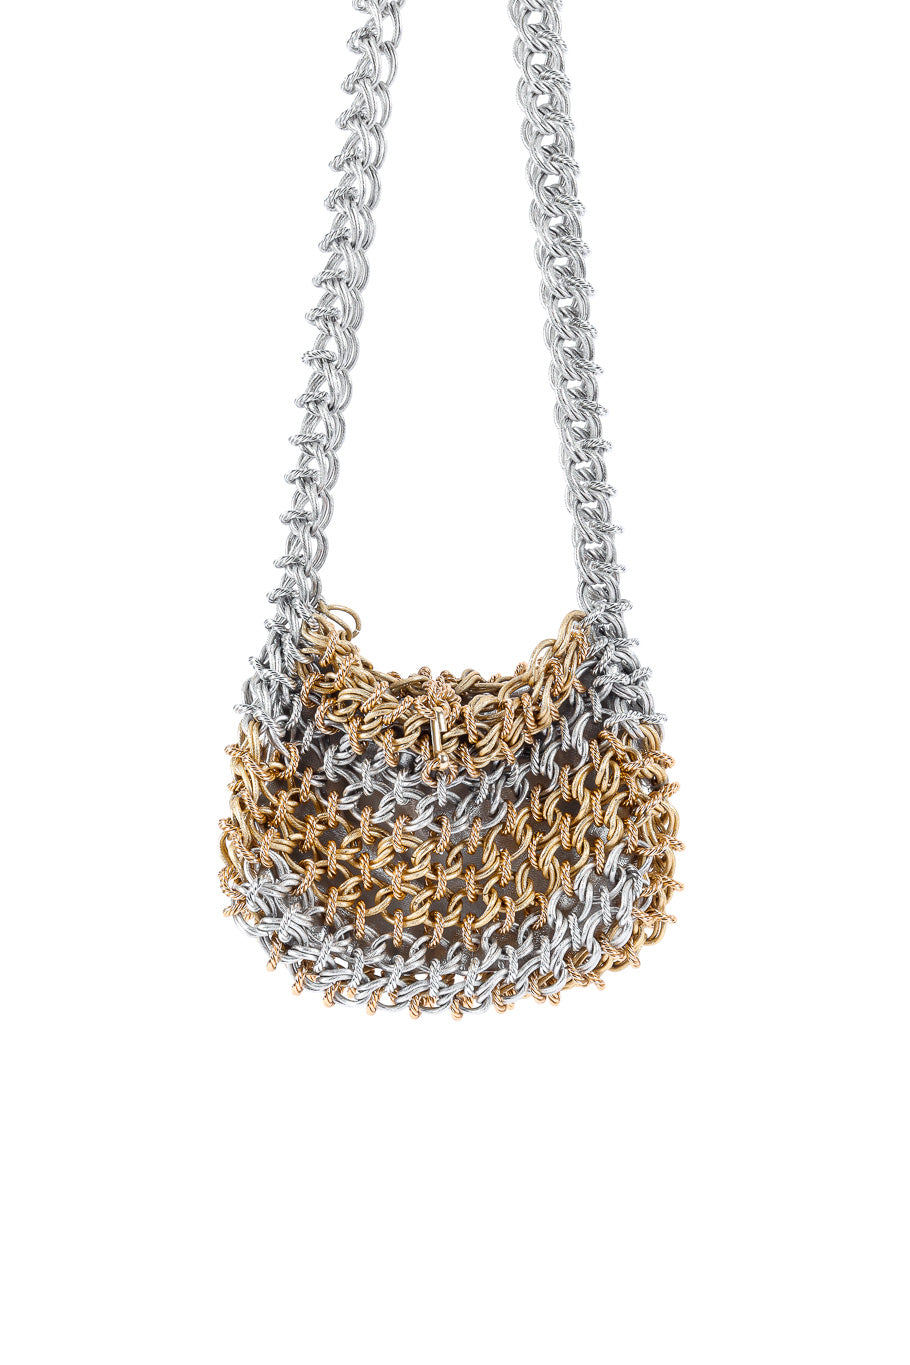 Chainlink shoulder bag by Raoul Calabro hanging on white  @recessla